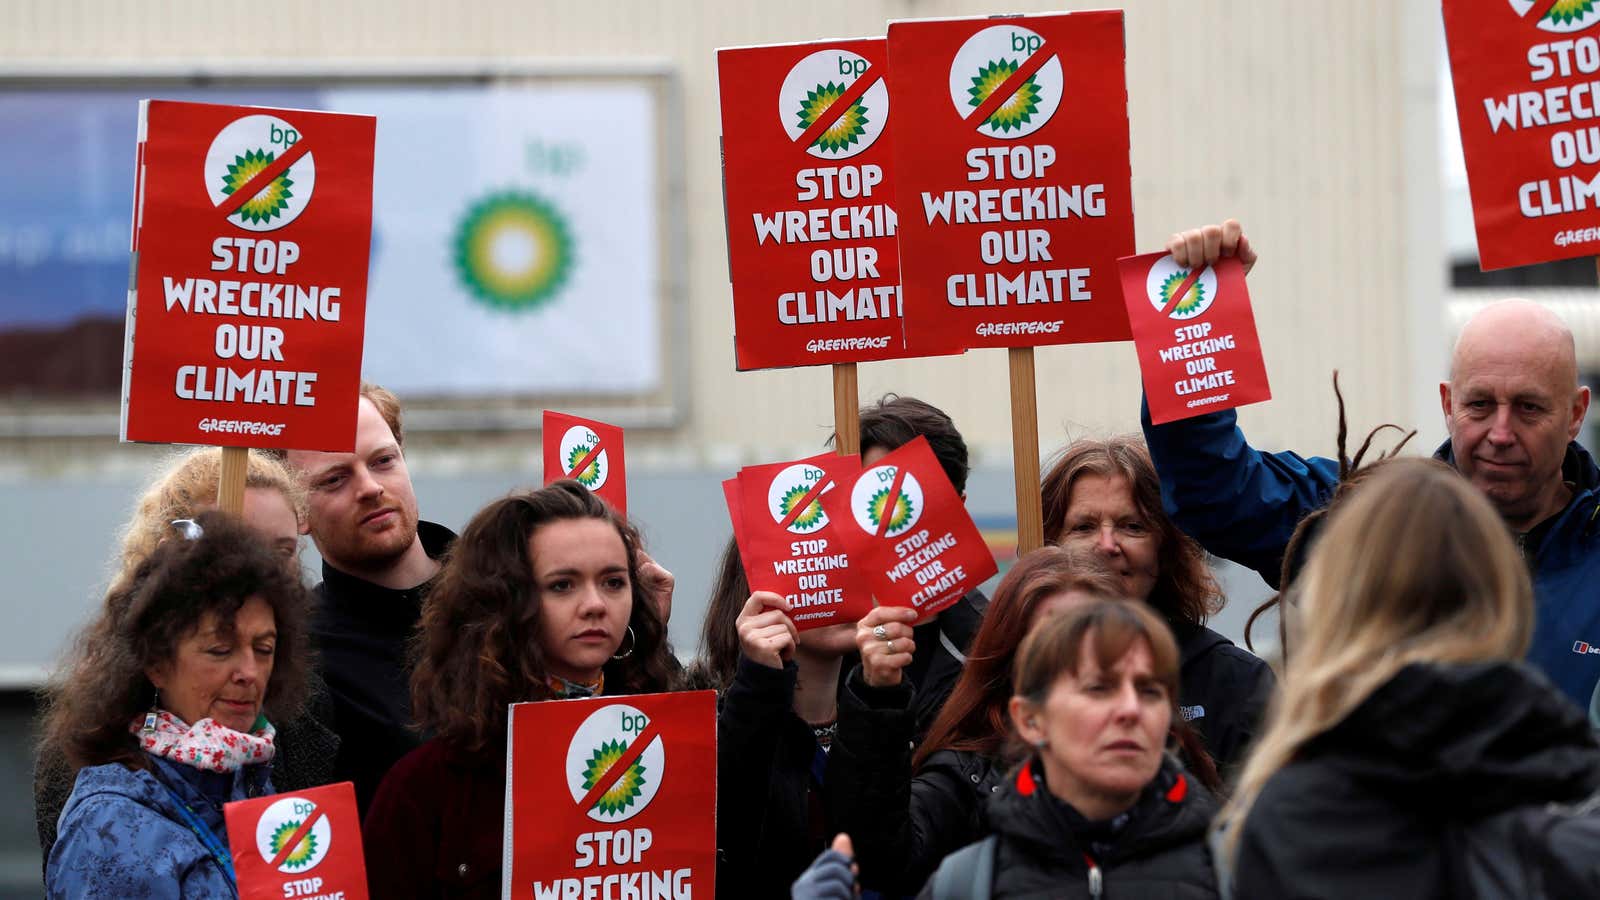 Climate change activists demonstrate against BP.